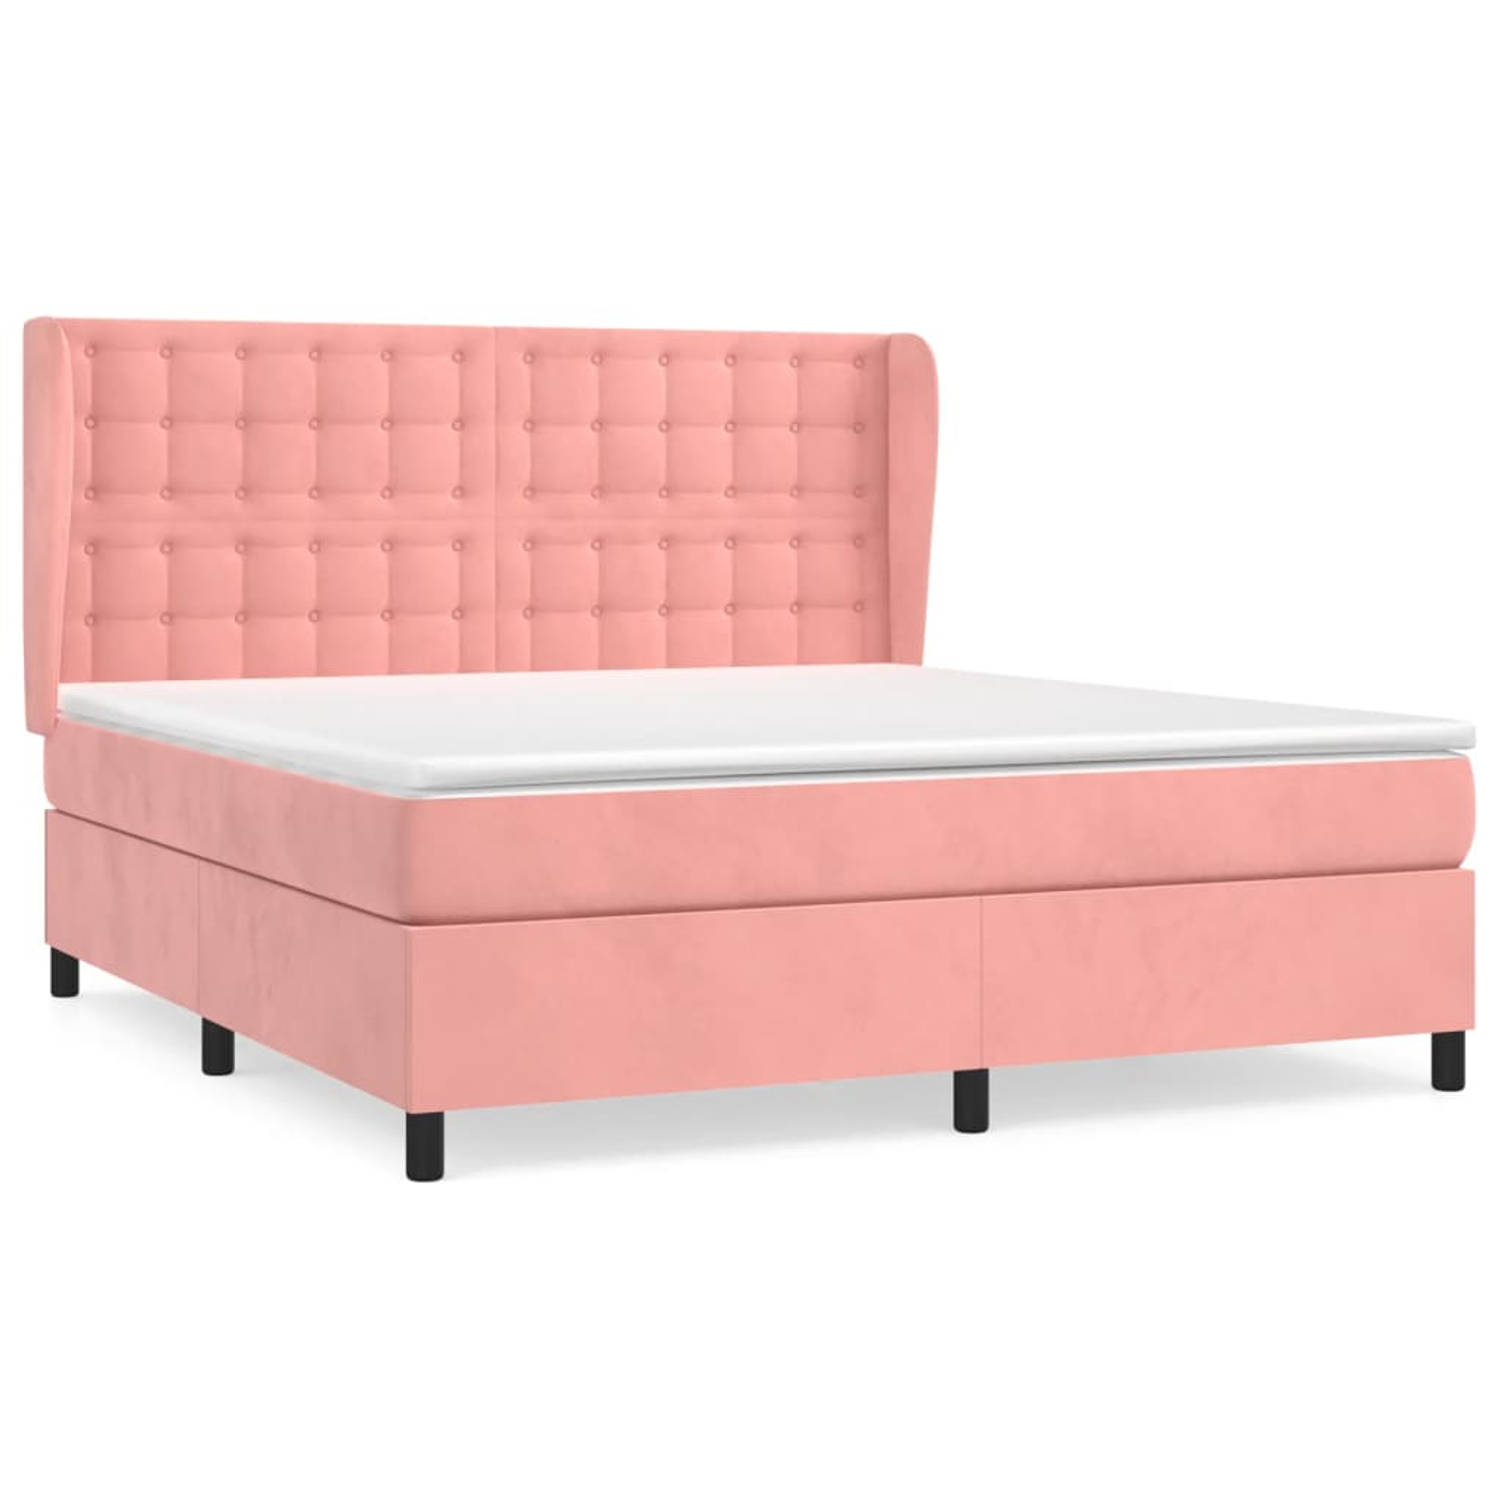 The Living Store Boxspring - Comfort - Bed - 203x183x118/128 cm - Roze Fluweel